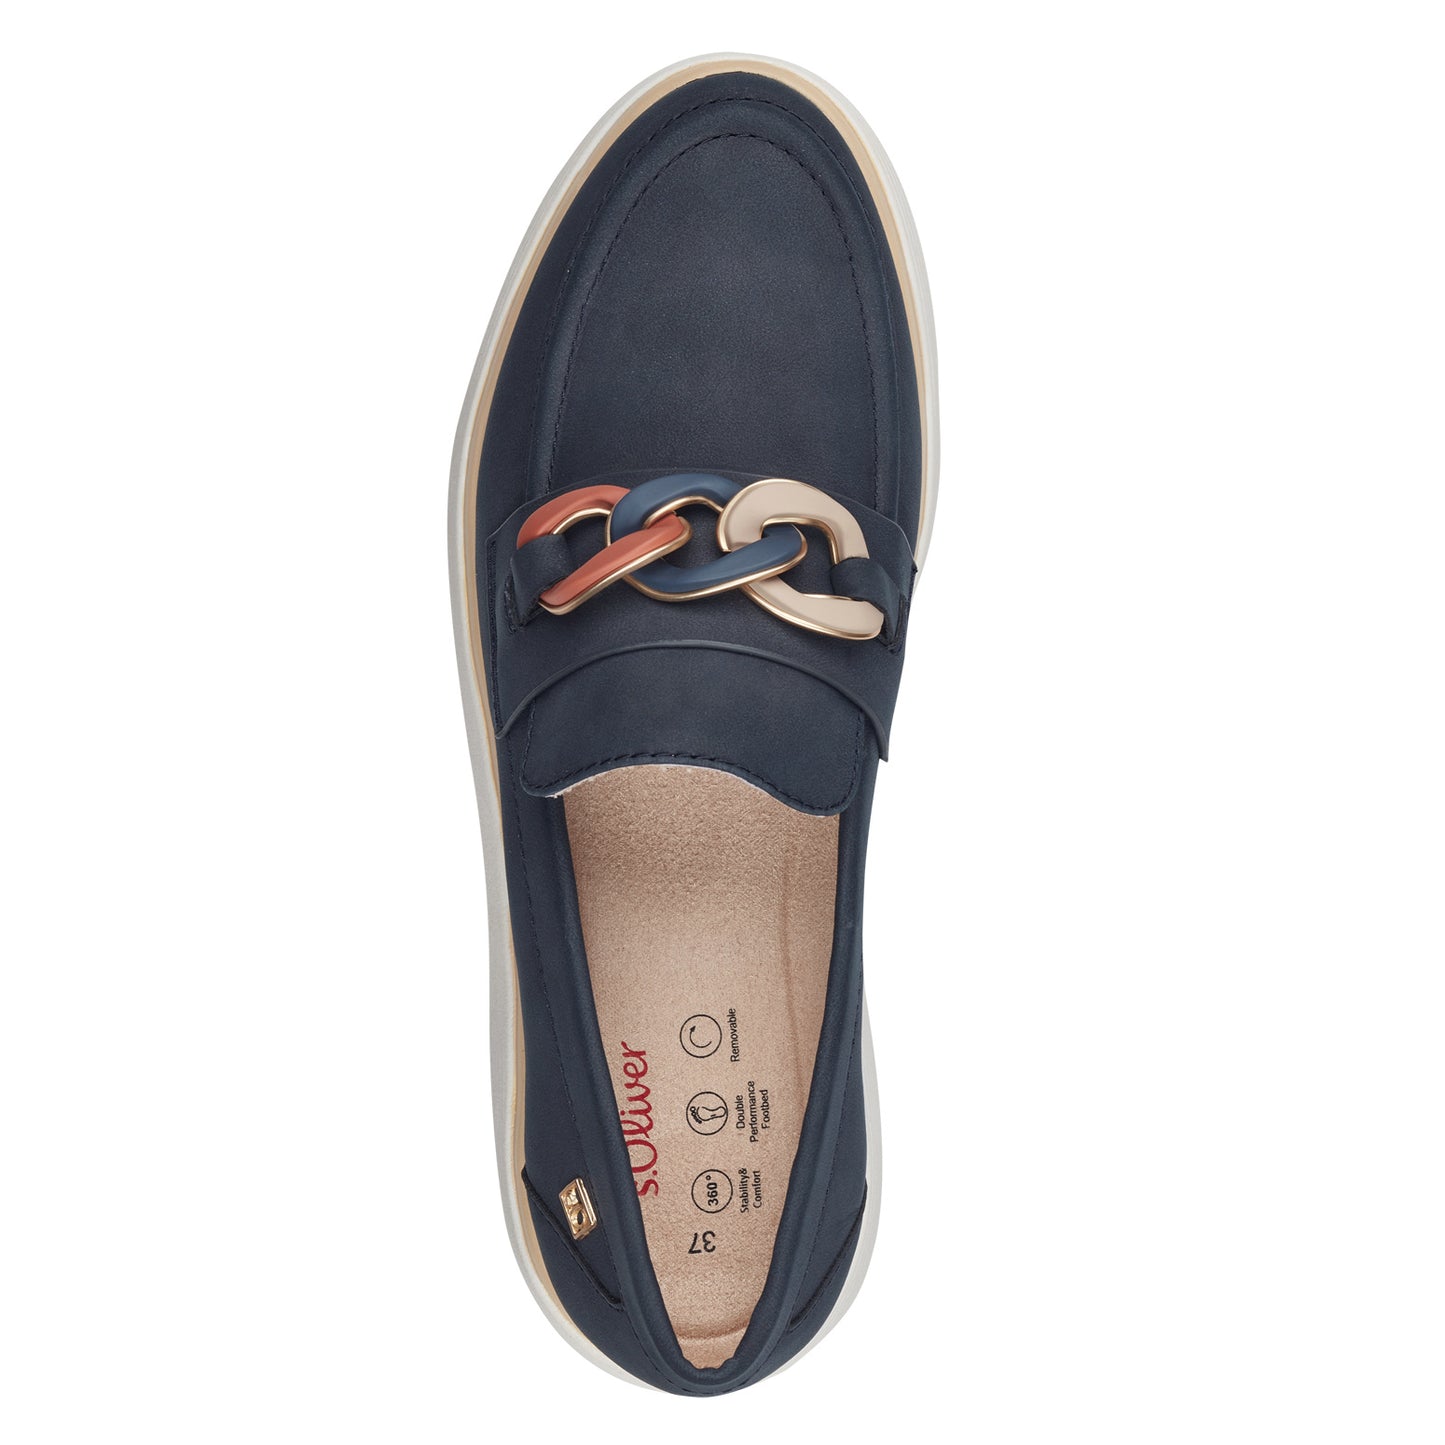 S.oliver - Ladies Shoes Loafers Navy (2008)